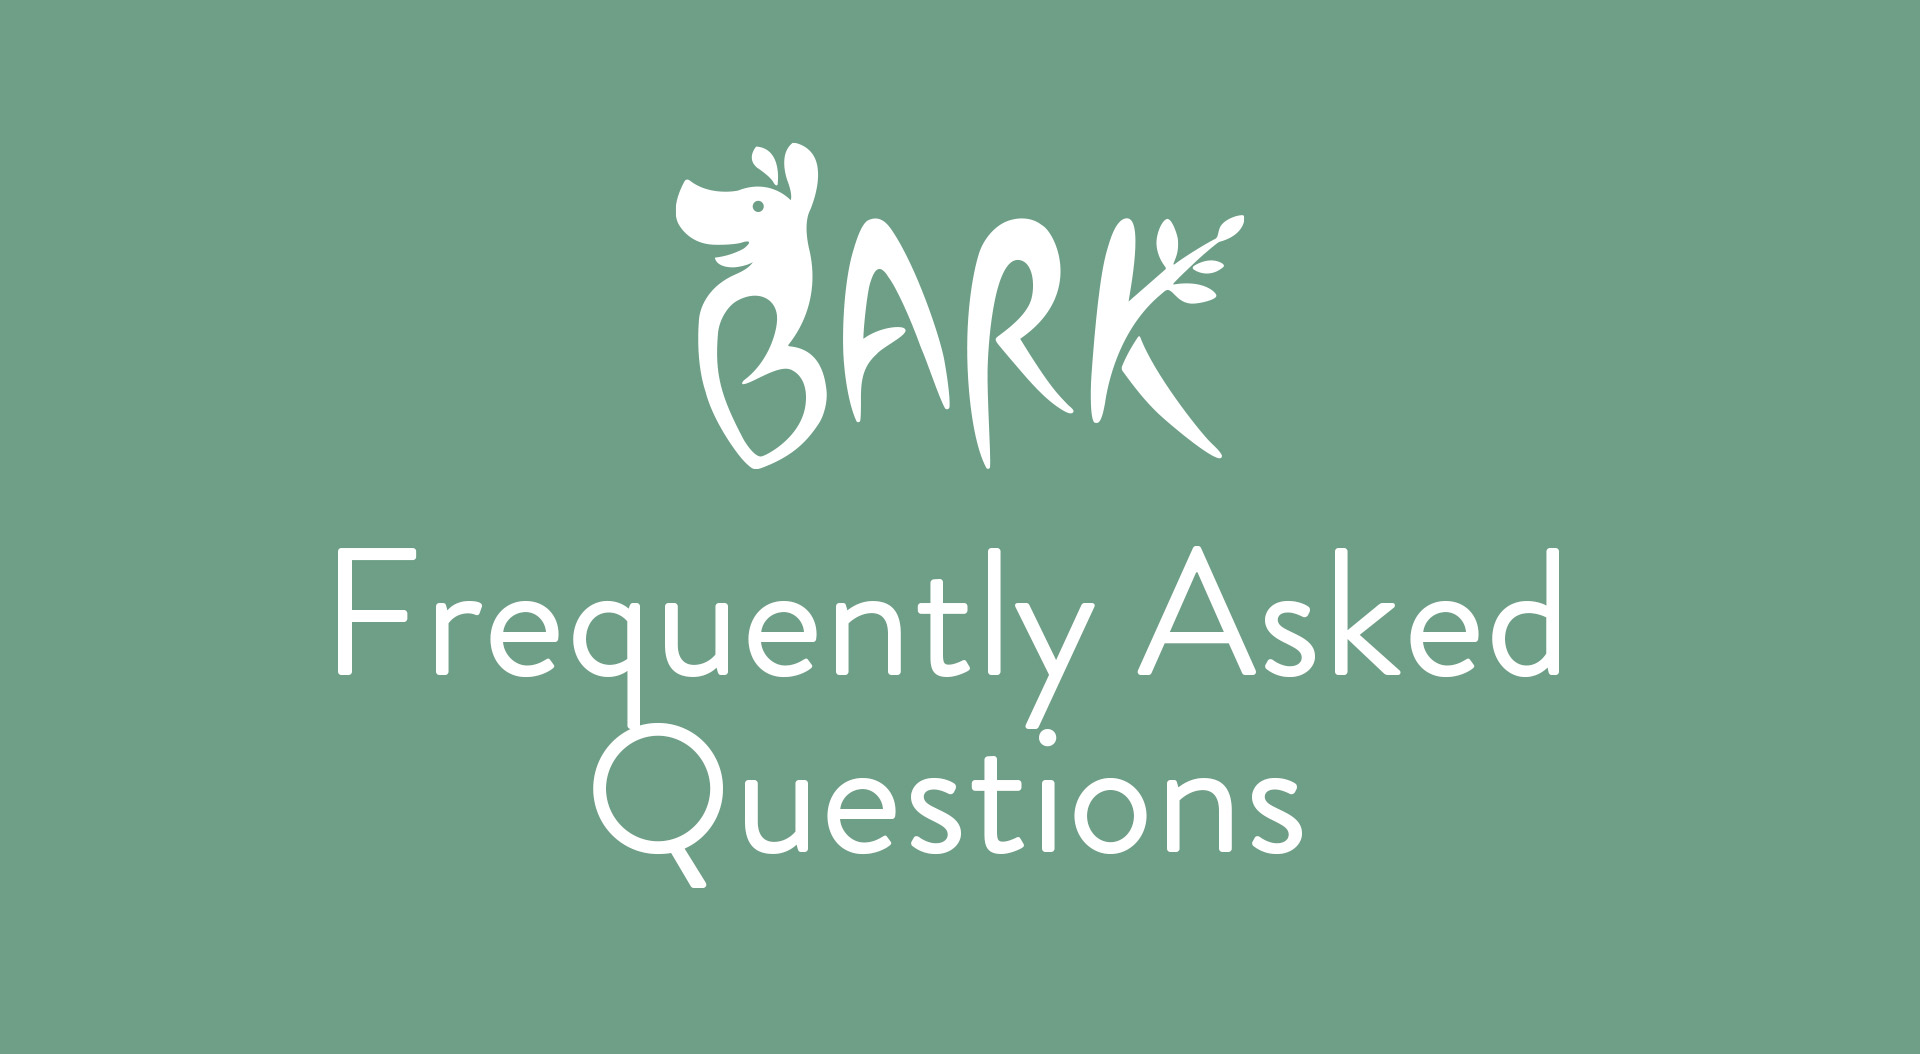 Dog Park Initiative Frequently Asked Questions